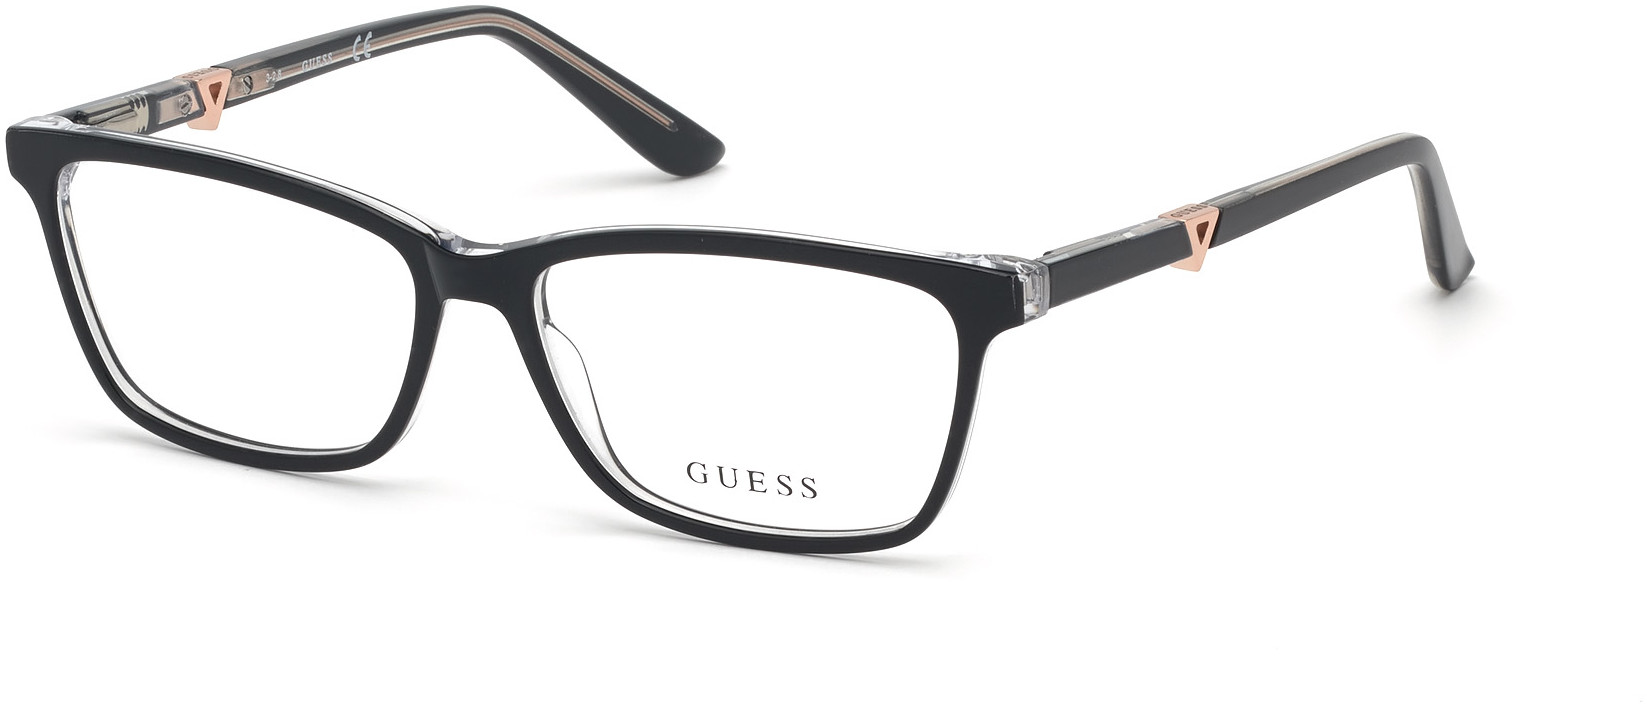 GUESS 2731 001